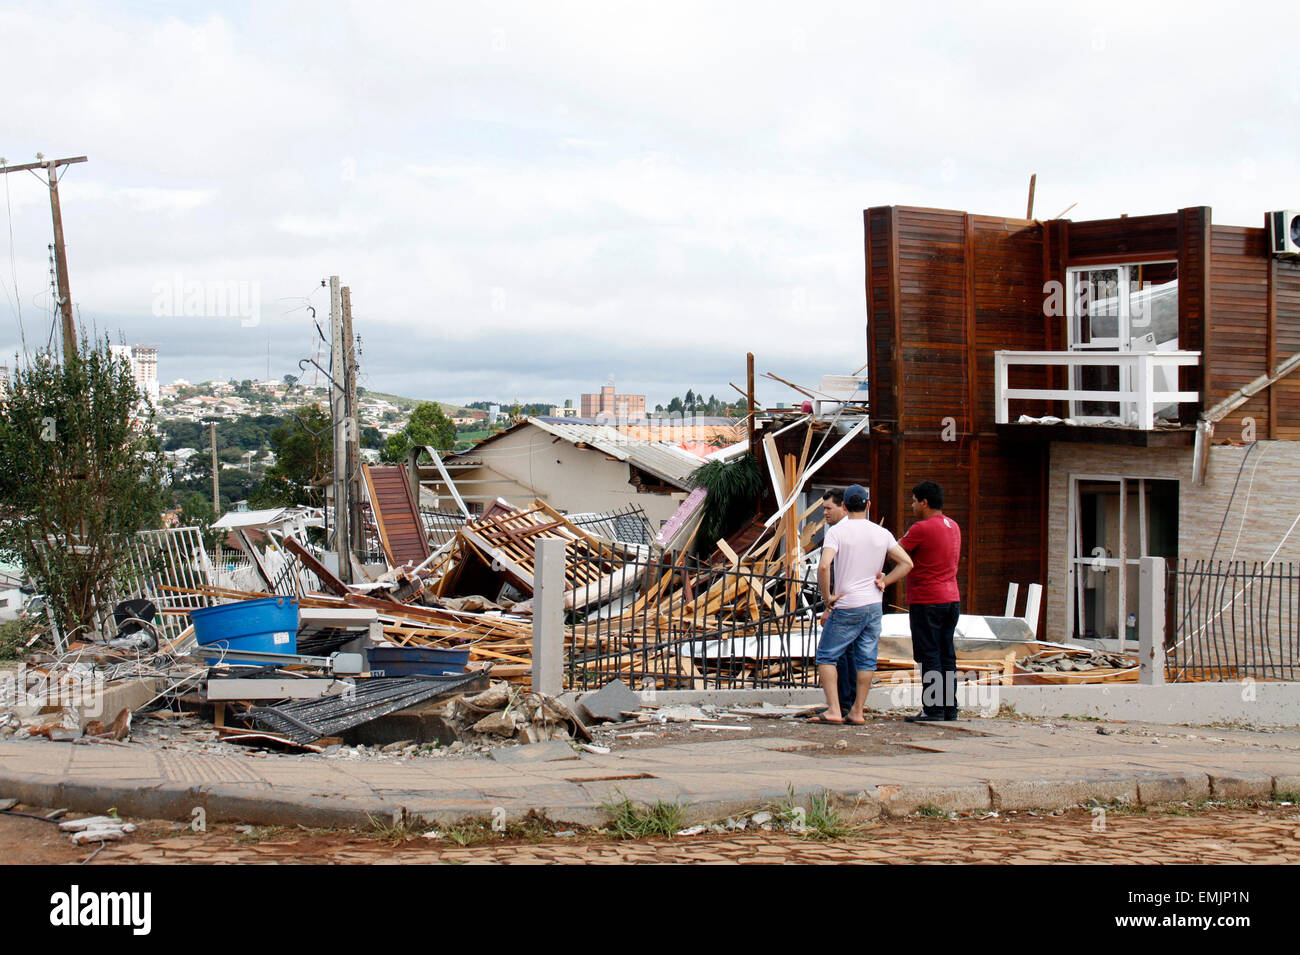 Xanxere, Brazil. 21st Apr, 2015. People watch the debris of a house that was destroyed due to the passing of a tornado in Xanxere municipality, Santa Catarina state, Brazil, on April 21, 2015. Credit:  Rodrigo Vargas/Raw Image/AGENCIA ESTADO/Xinhua/Alamy Live News Stock Photo